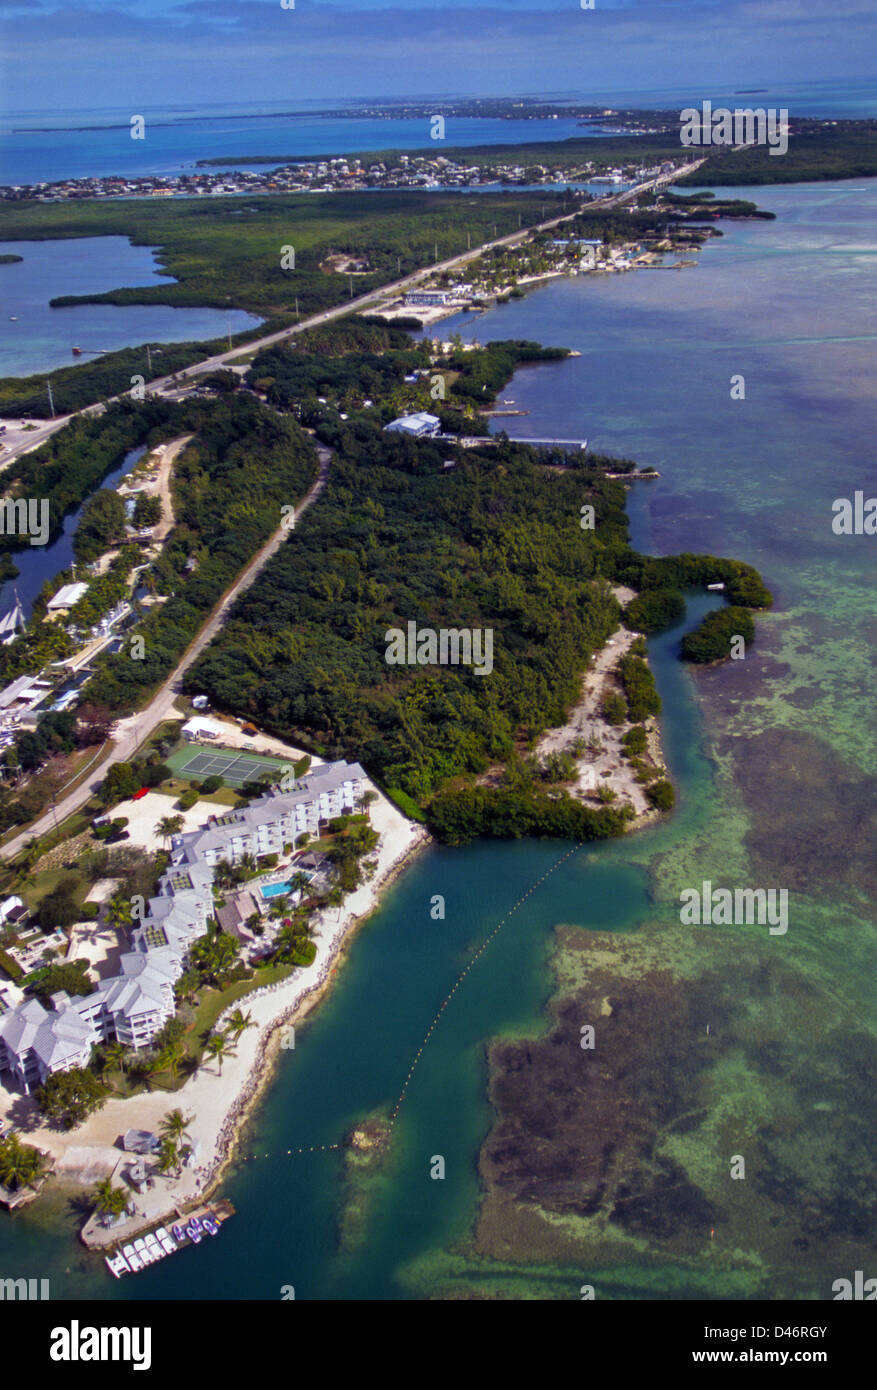 An aerial view of Islamorada, Florida, USA, midway in the Florida Keys along the Overseas Highway, shows Florida Bay (r.) and the Atlantic Ocean (l.). Stock Photo